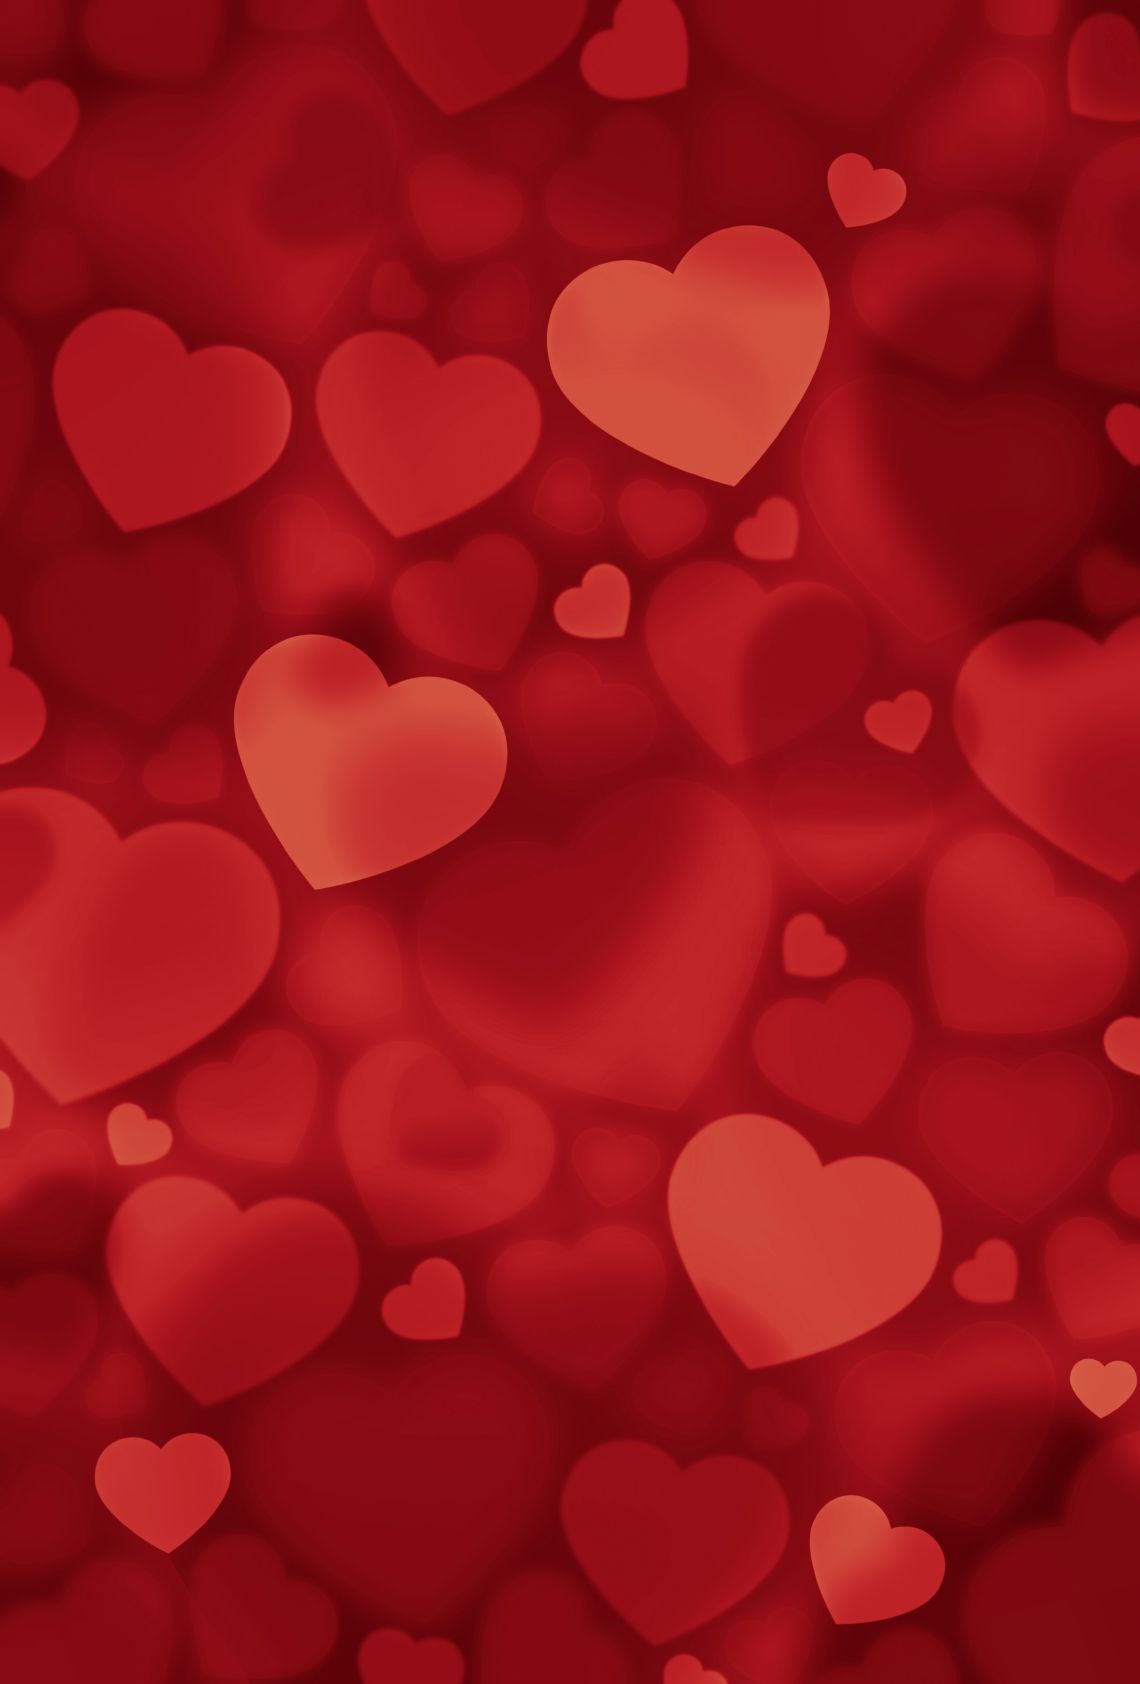 Red Hearts Wallpapers Free Download - Red Wallpaper With Hearts , HD Wallpaper & Backgrounds